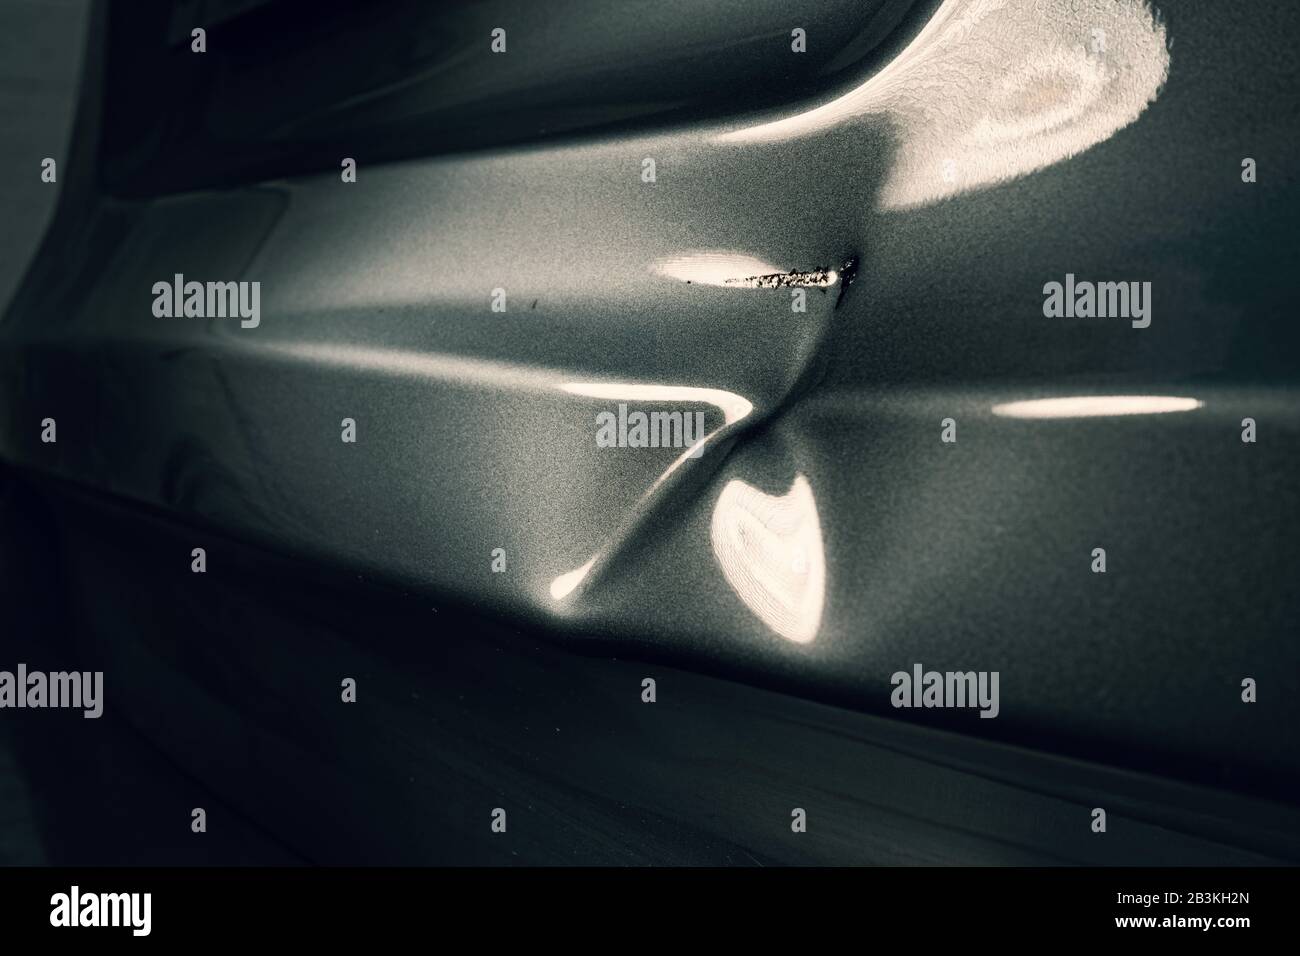 A dent in the body of a silver car in exciting light. Stock Photo